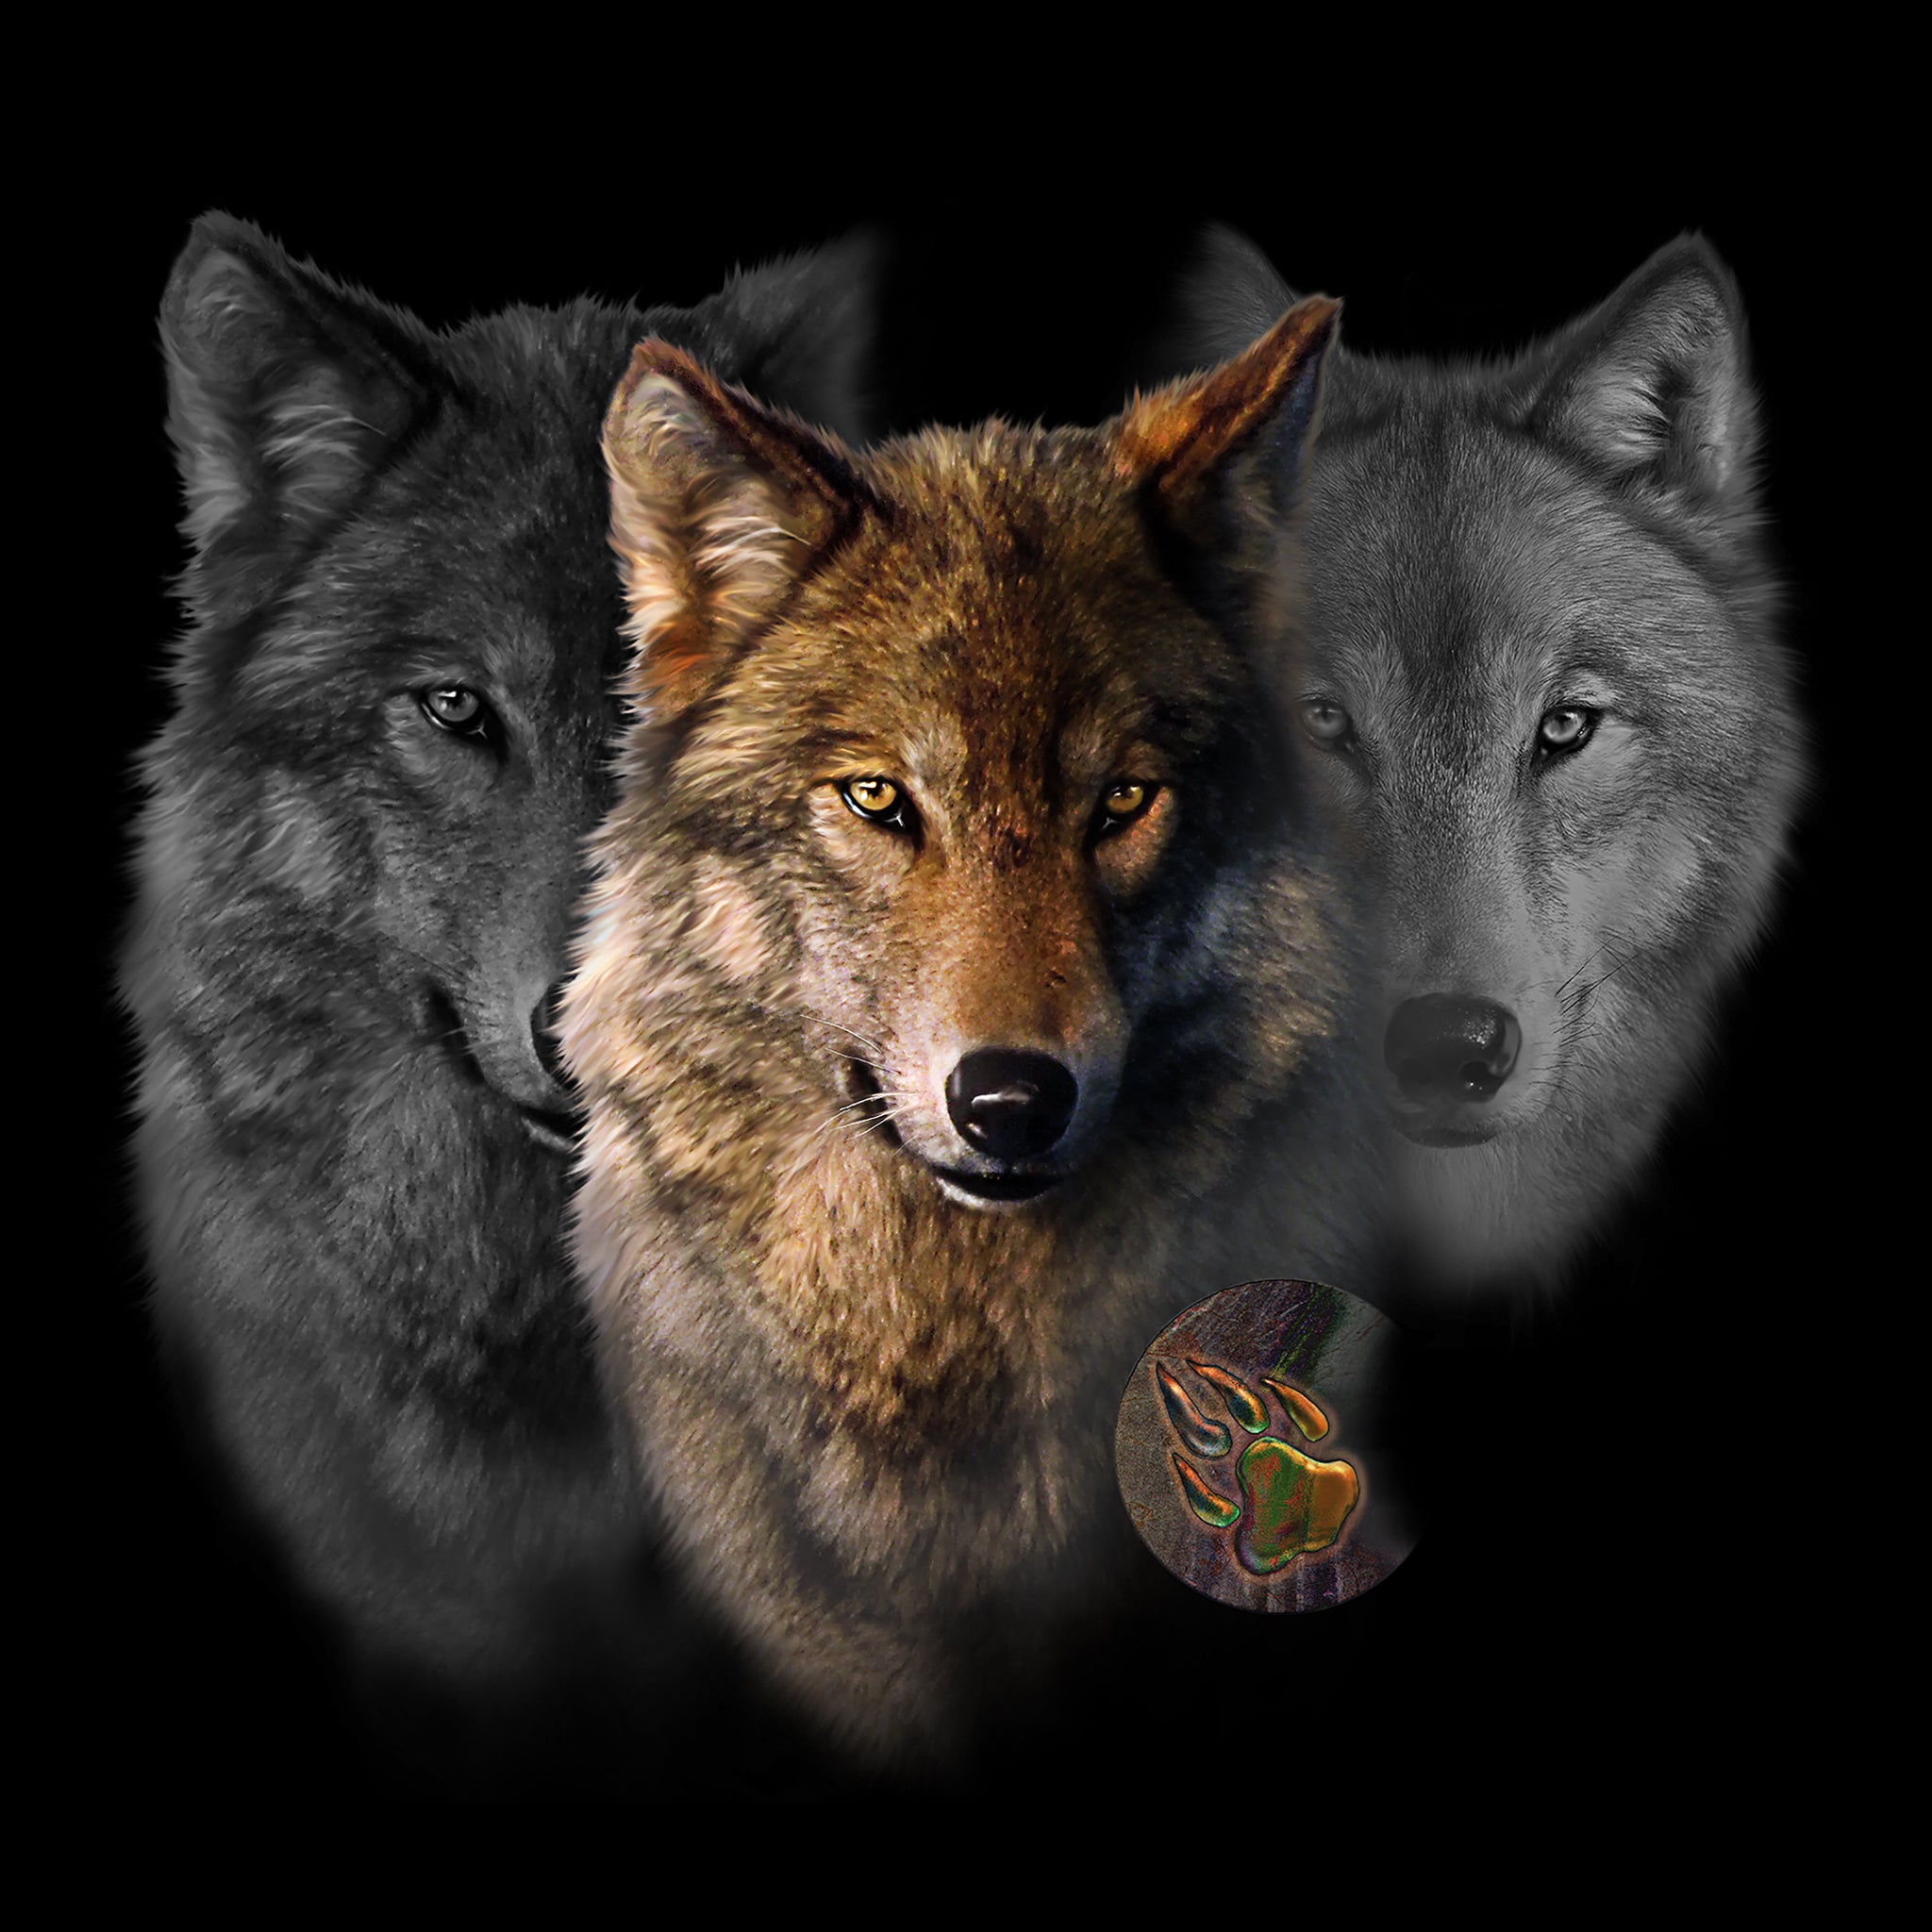 Wolf Trilogy by Robert Campbell -  Painting of three wolf heads with paw imprint 